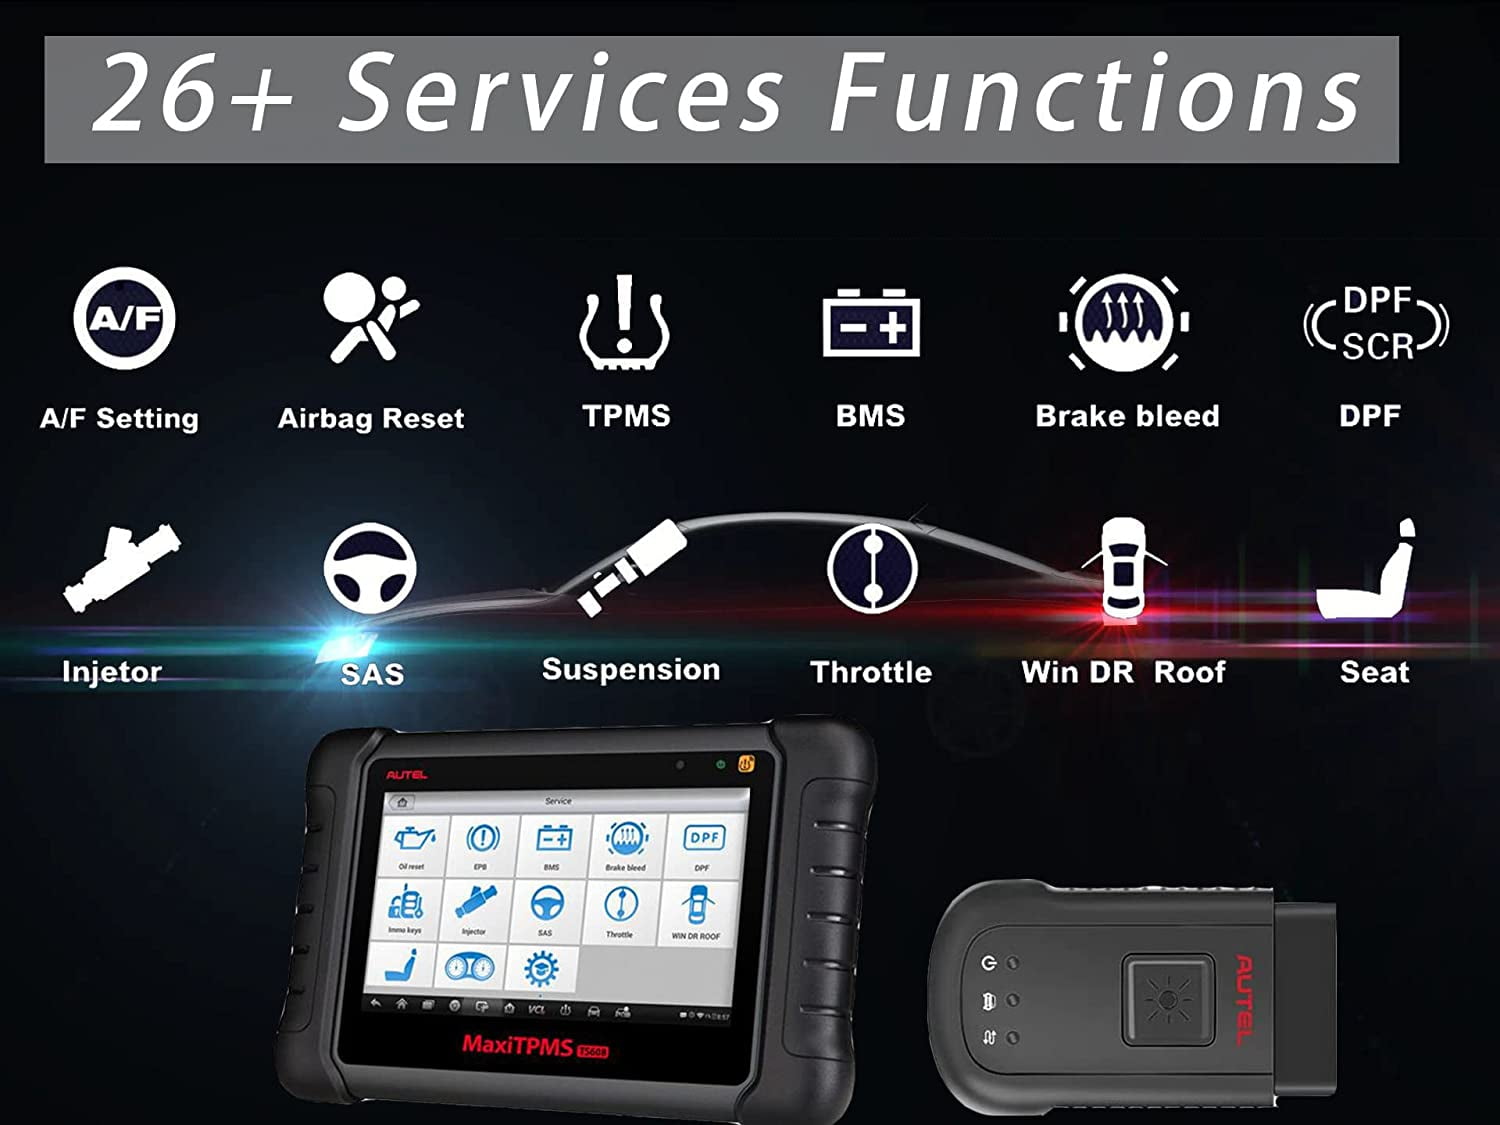 Autel V100 MaxiSYS VCI100 Compact Bluetooth-Compatible Vehicle